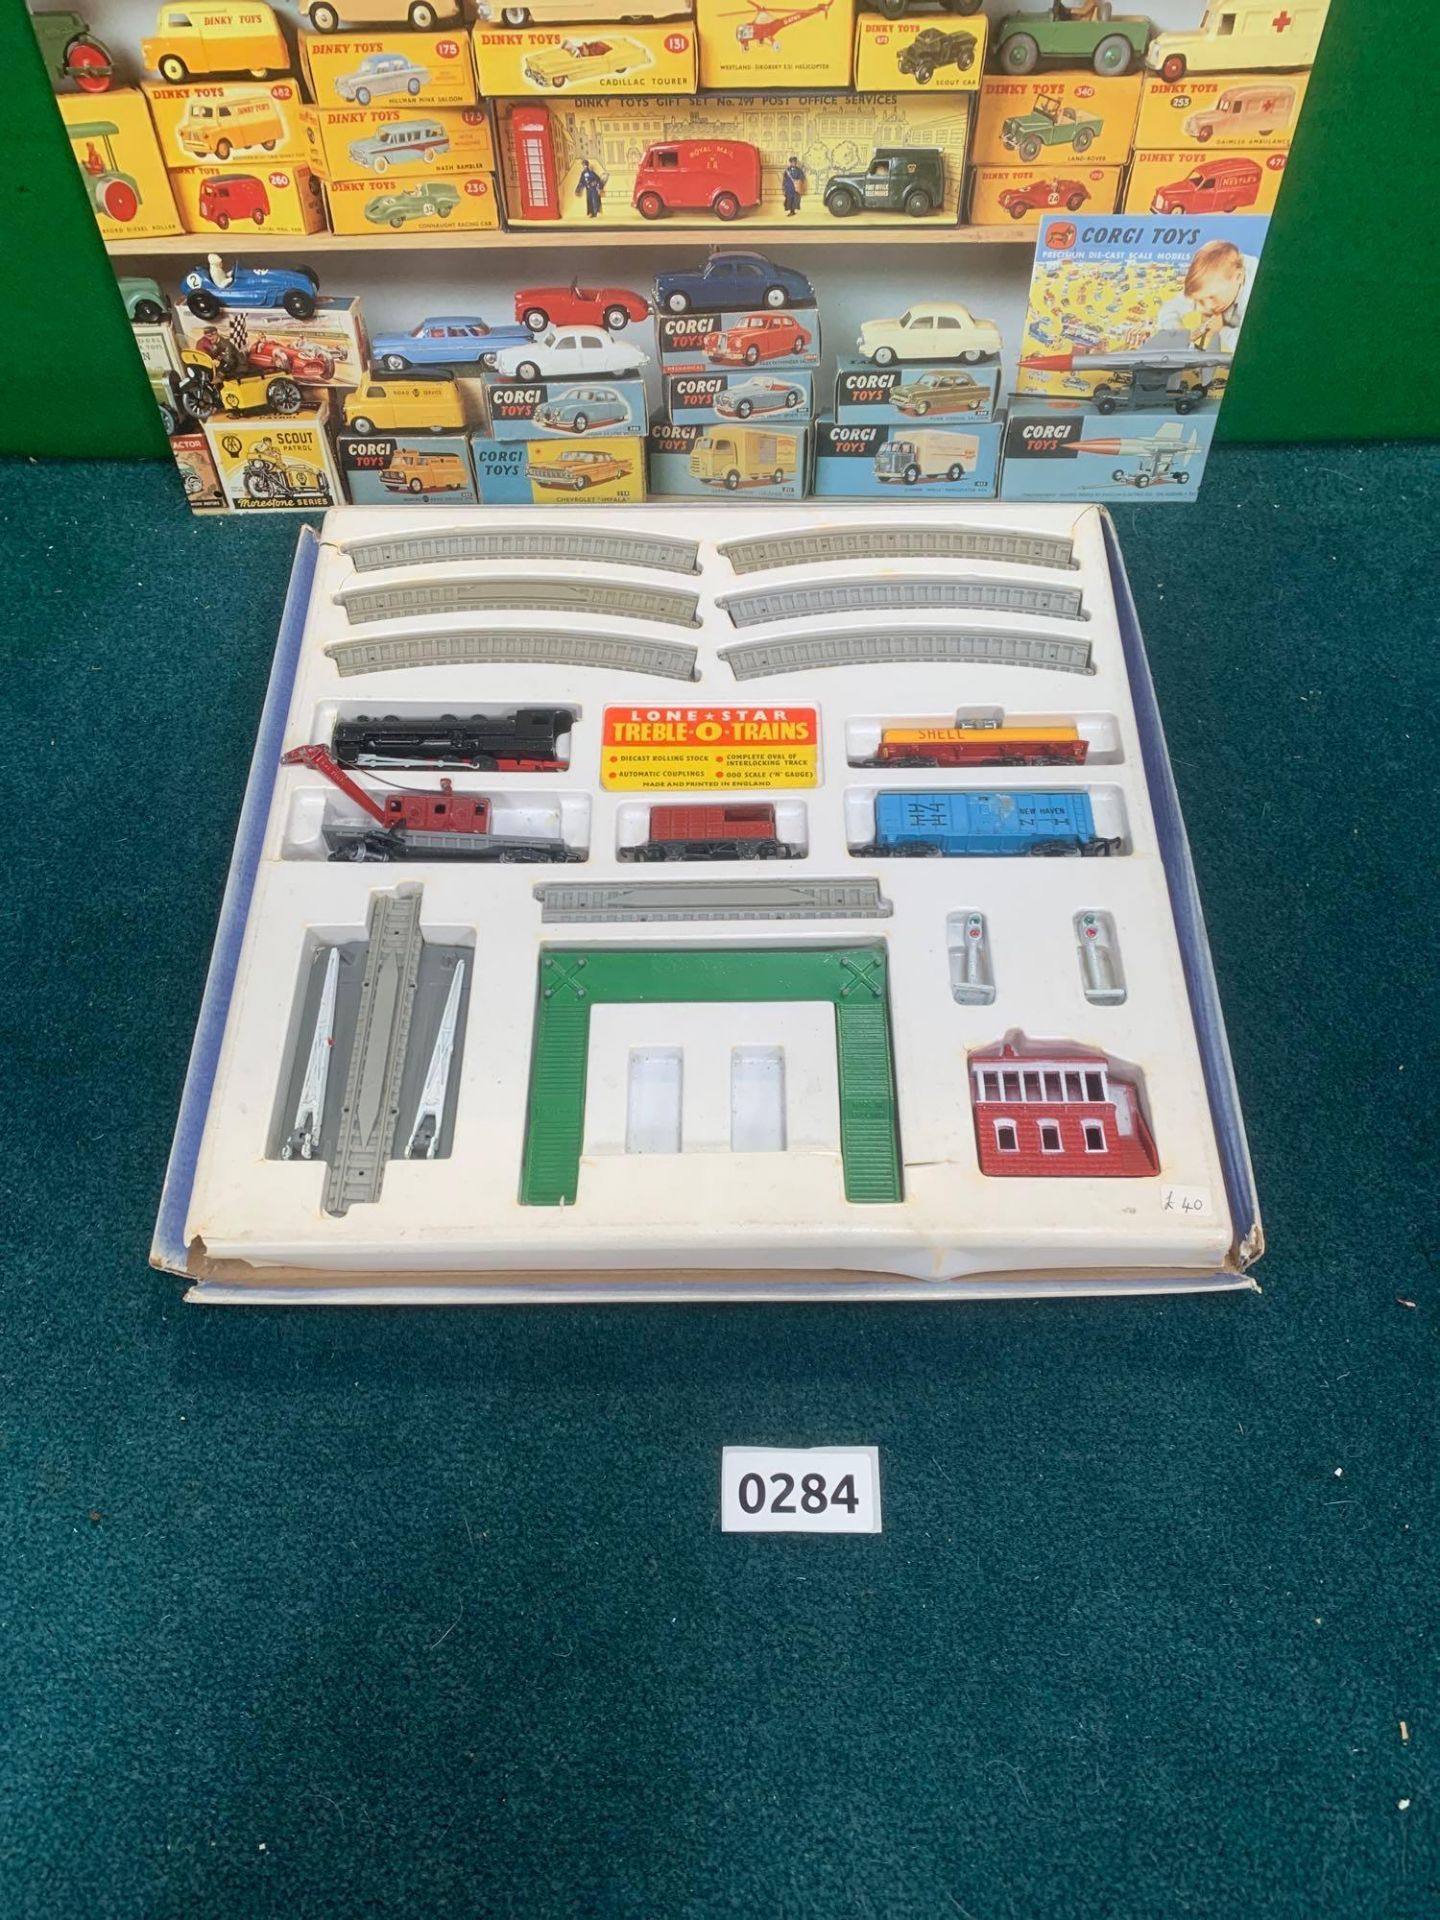 Lone Star Treble -O- Trains Box Has No Lid But Is Complete With Contents As Pictured Trains Track - Bild 7 aus 8